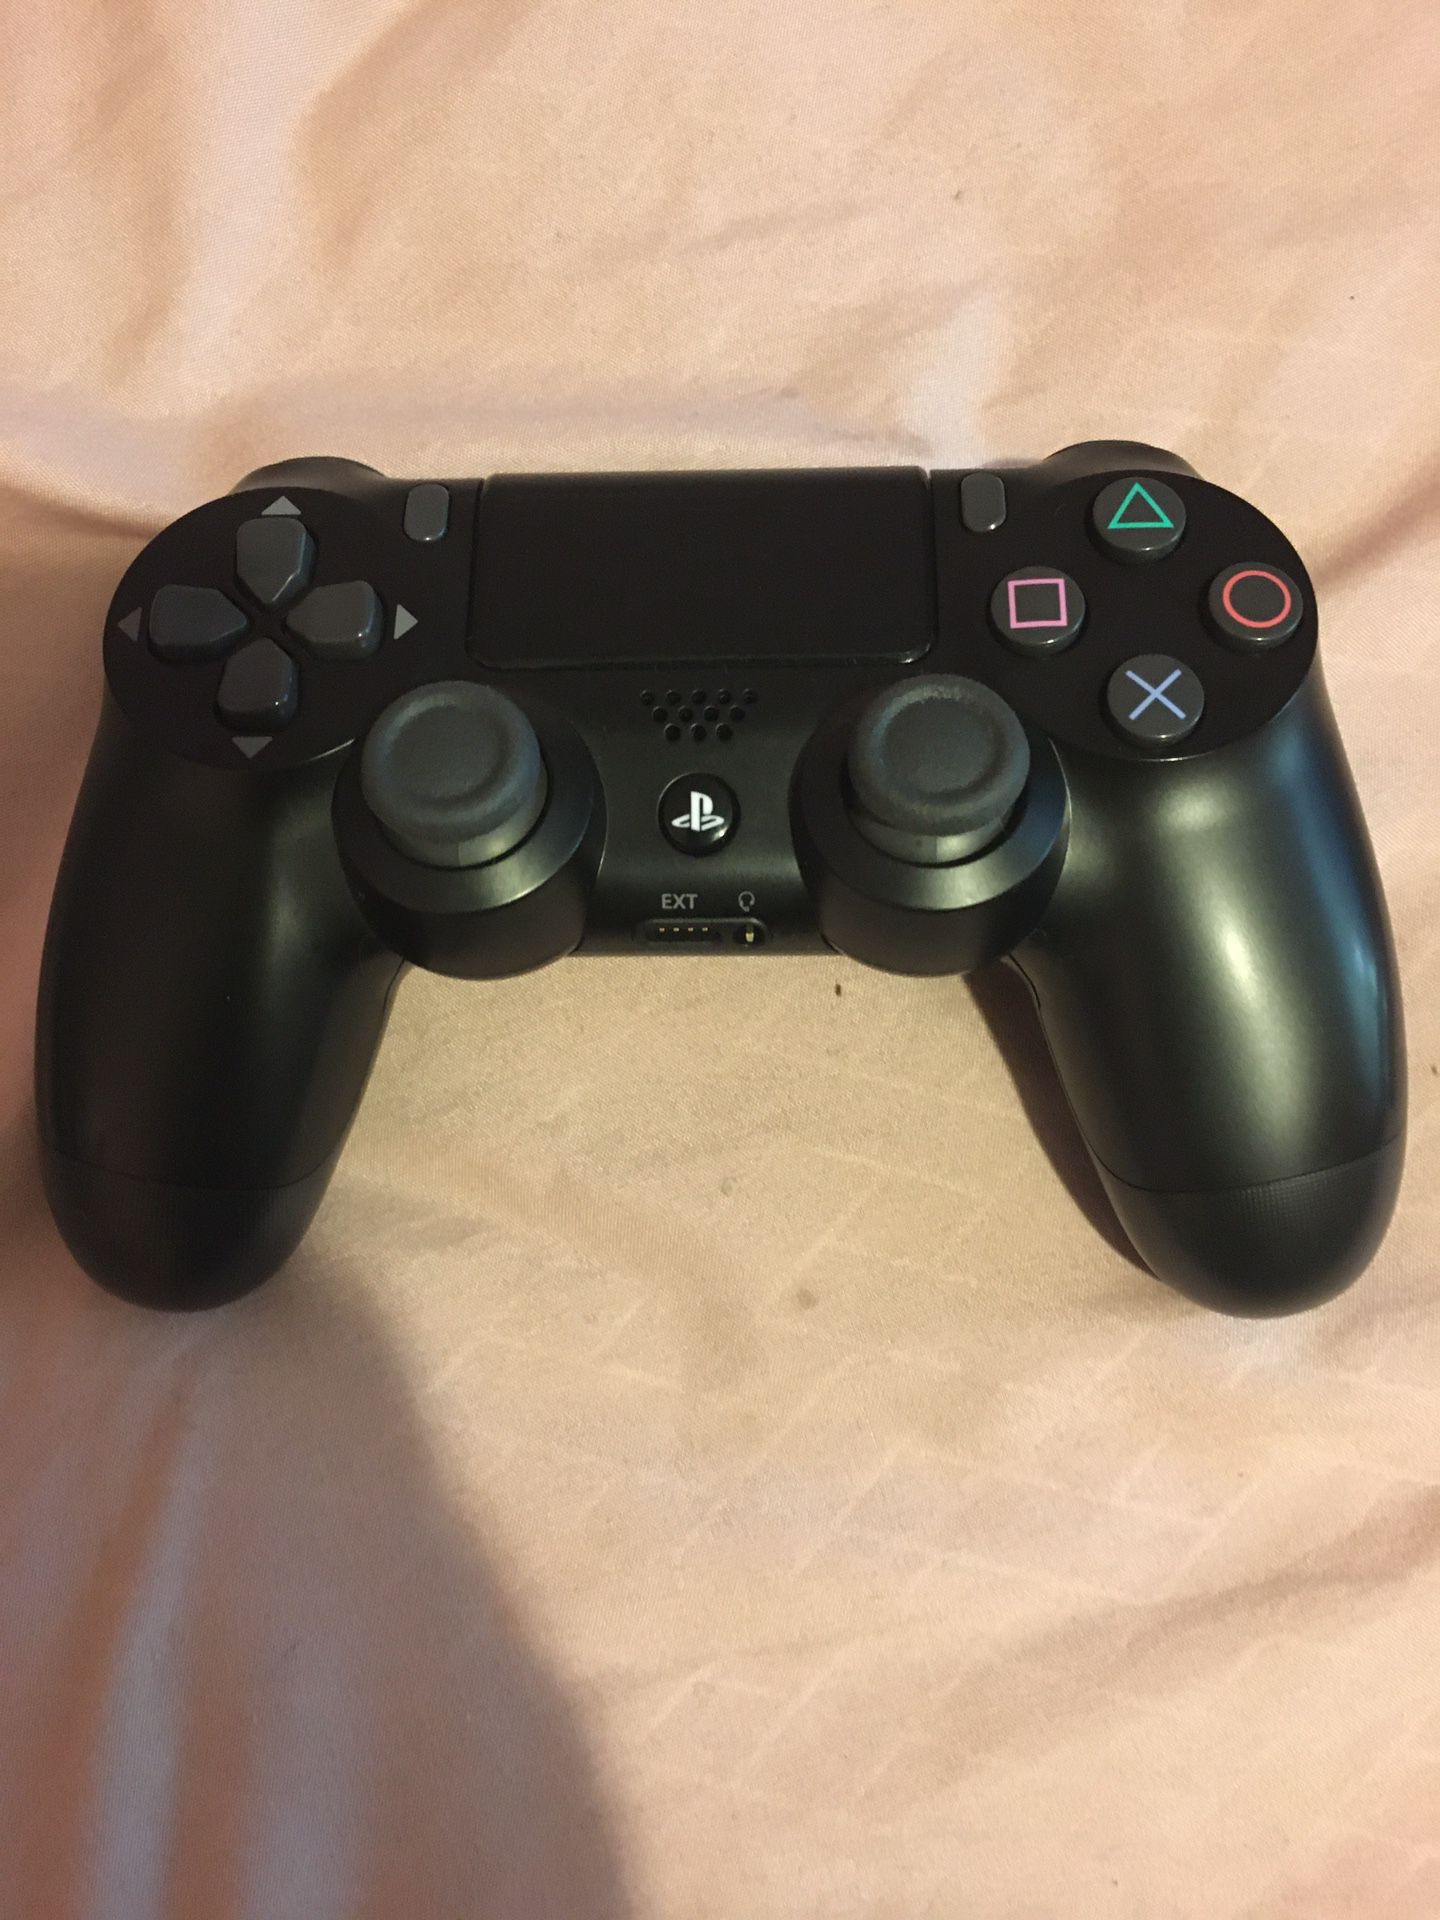 Dual Shock 4 PS4 Controller for Sale with Madden included